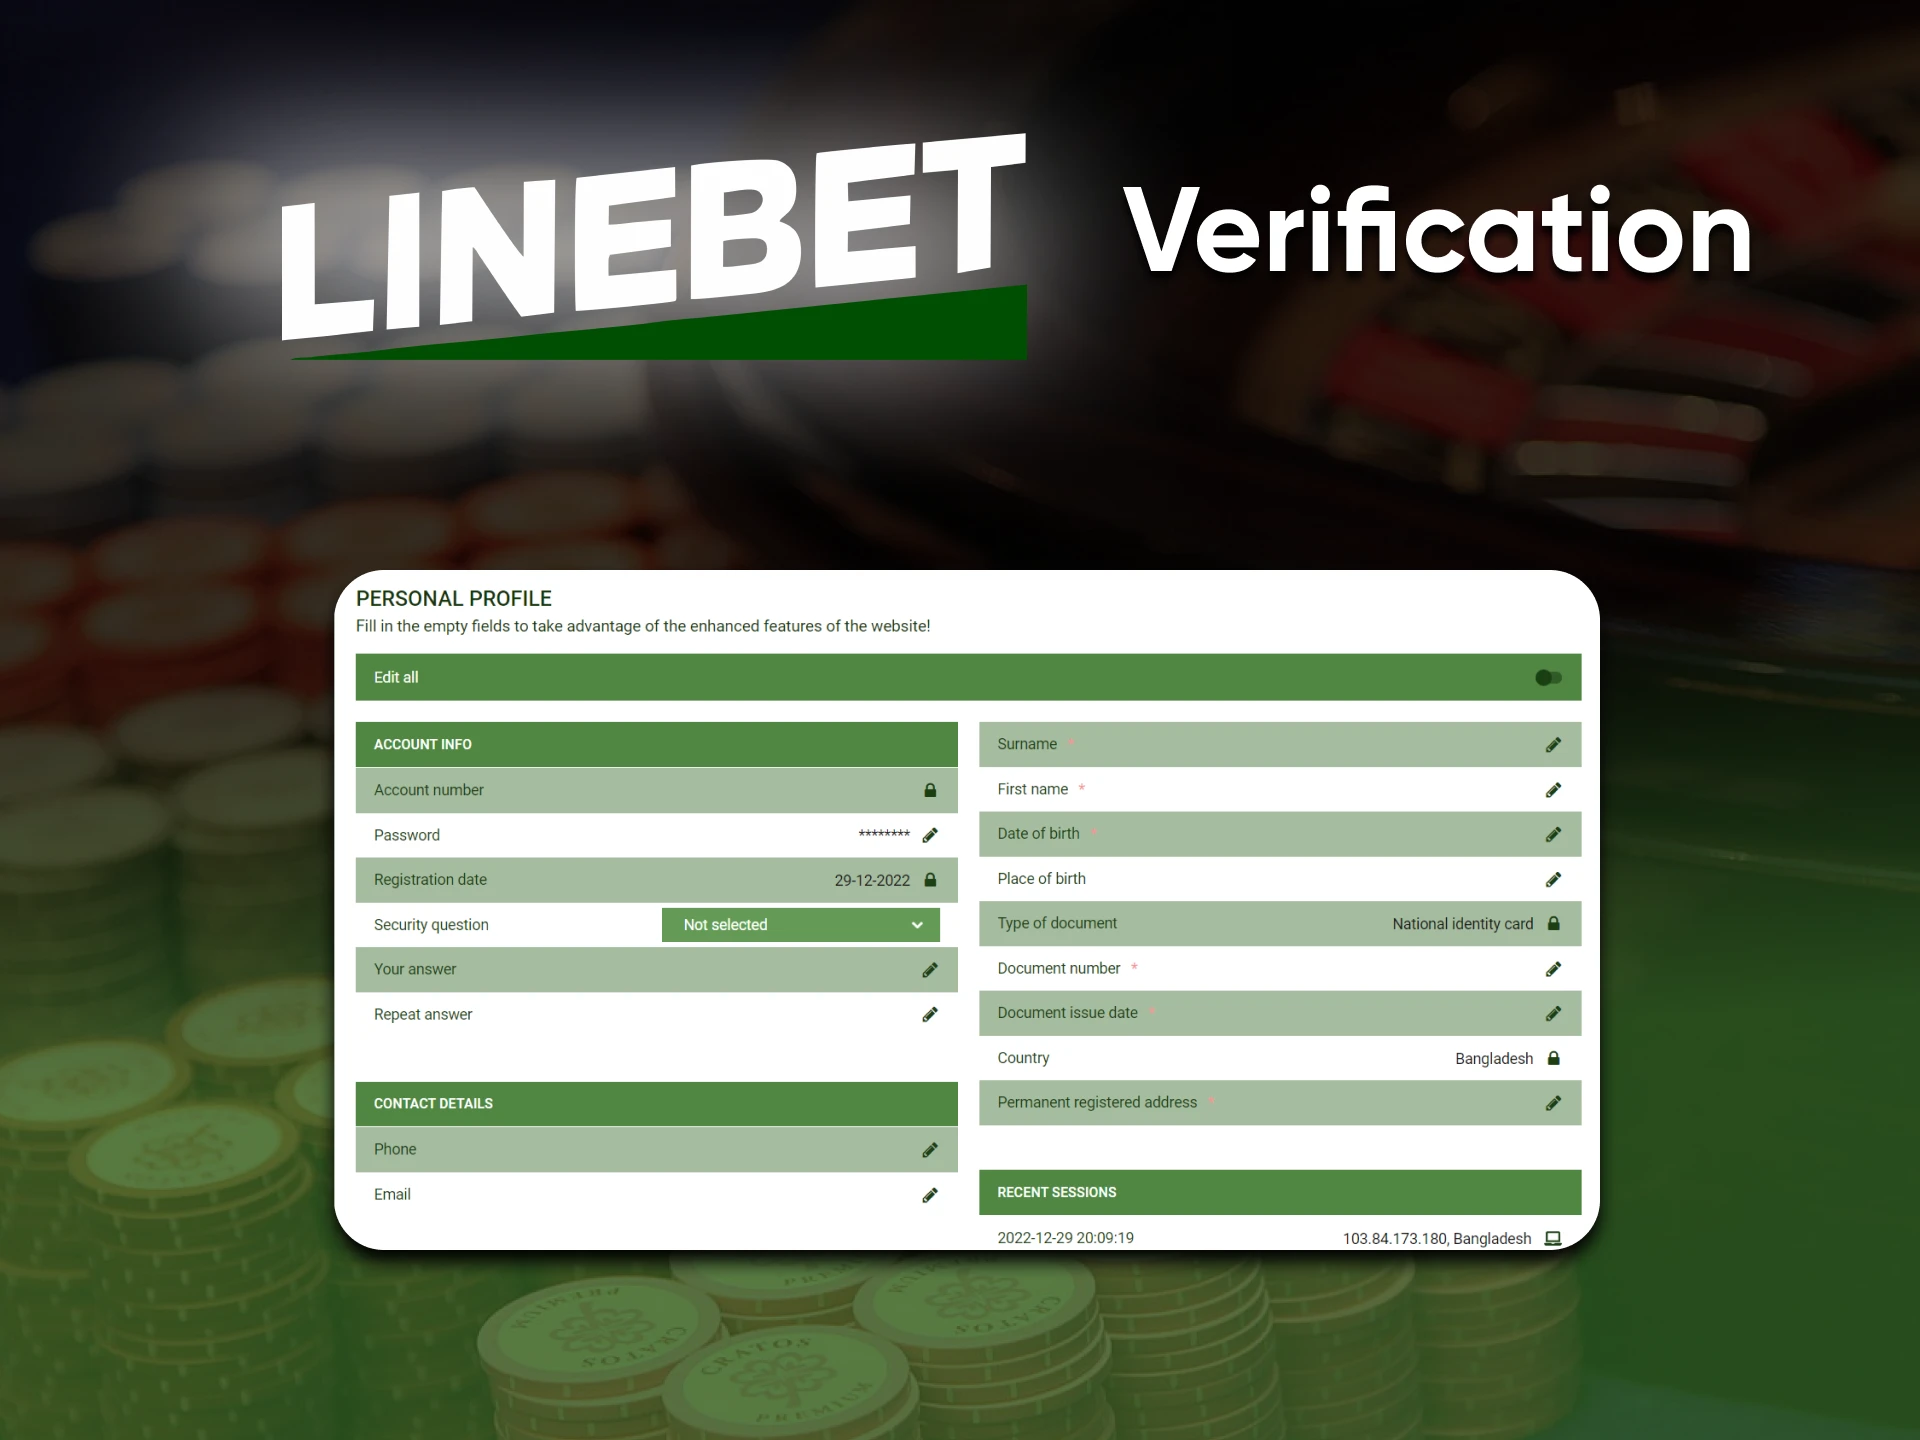 To fully use the Linebet service, fill in your details.